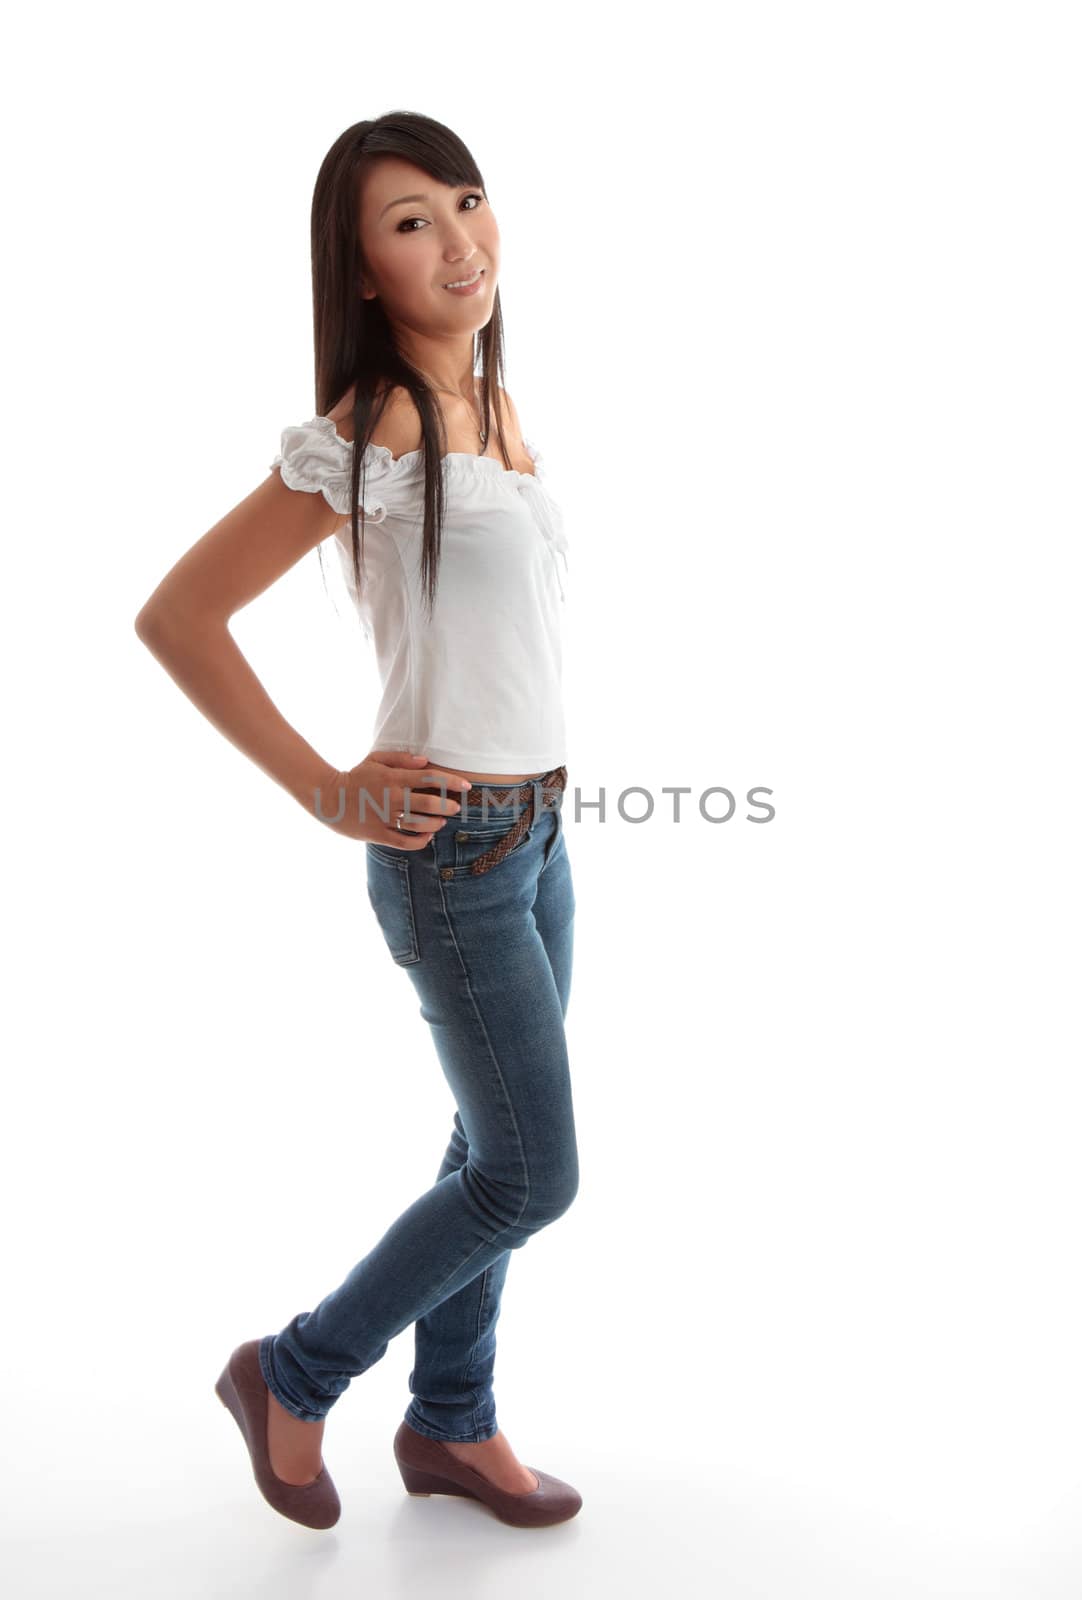 Beautiful young girl wearing skinny leg denim jeans and a white ruffled top.